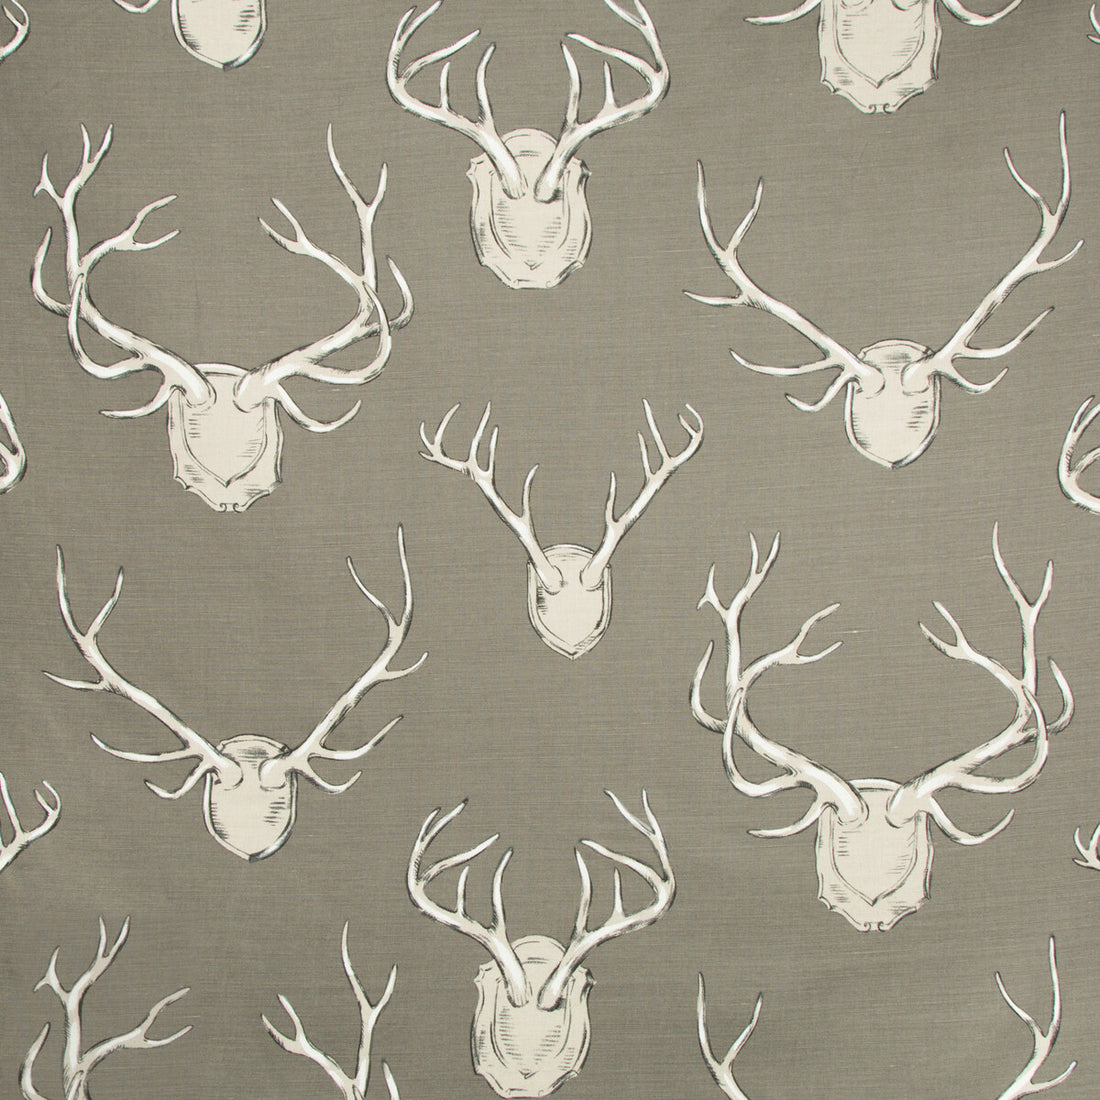 Antlers fabric in grey color - pattern 2009143.11.0 - by Lee Jofa in the Lodge II Prints collection